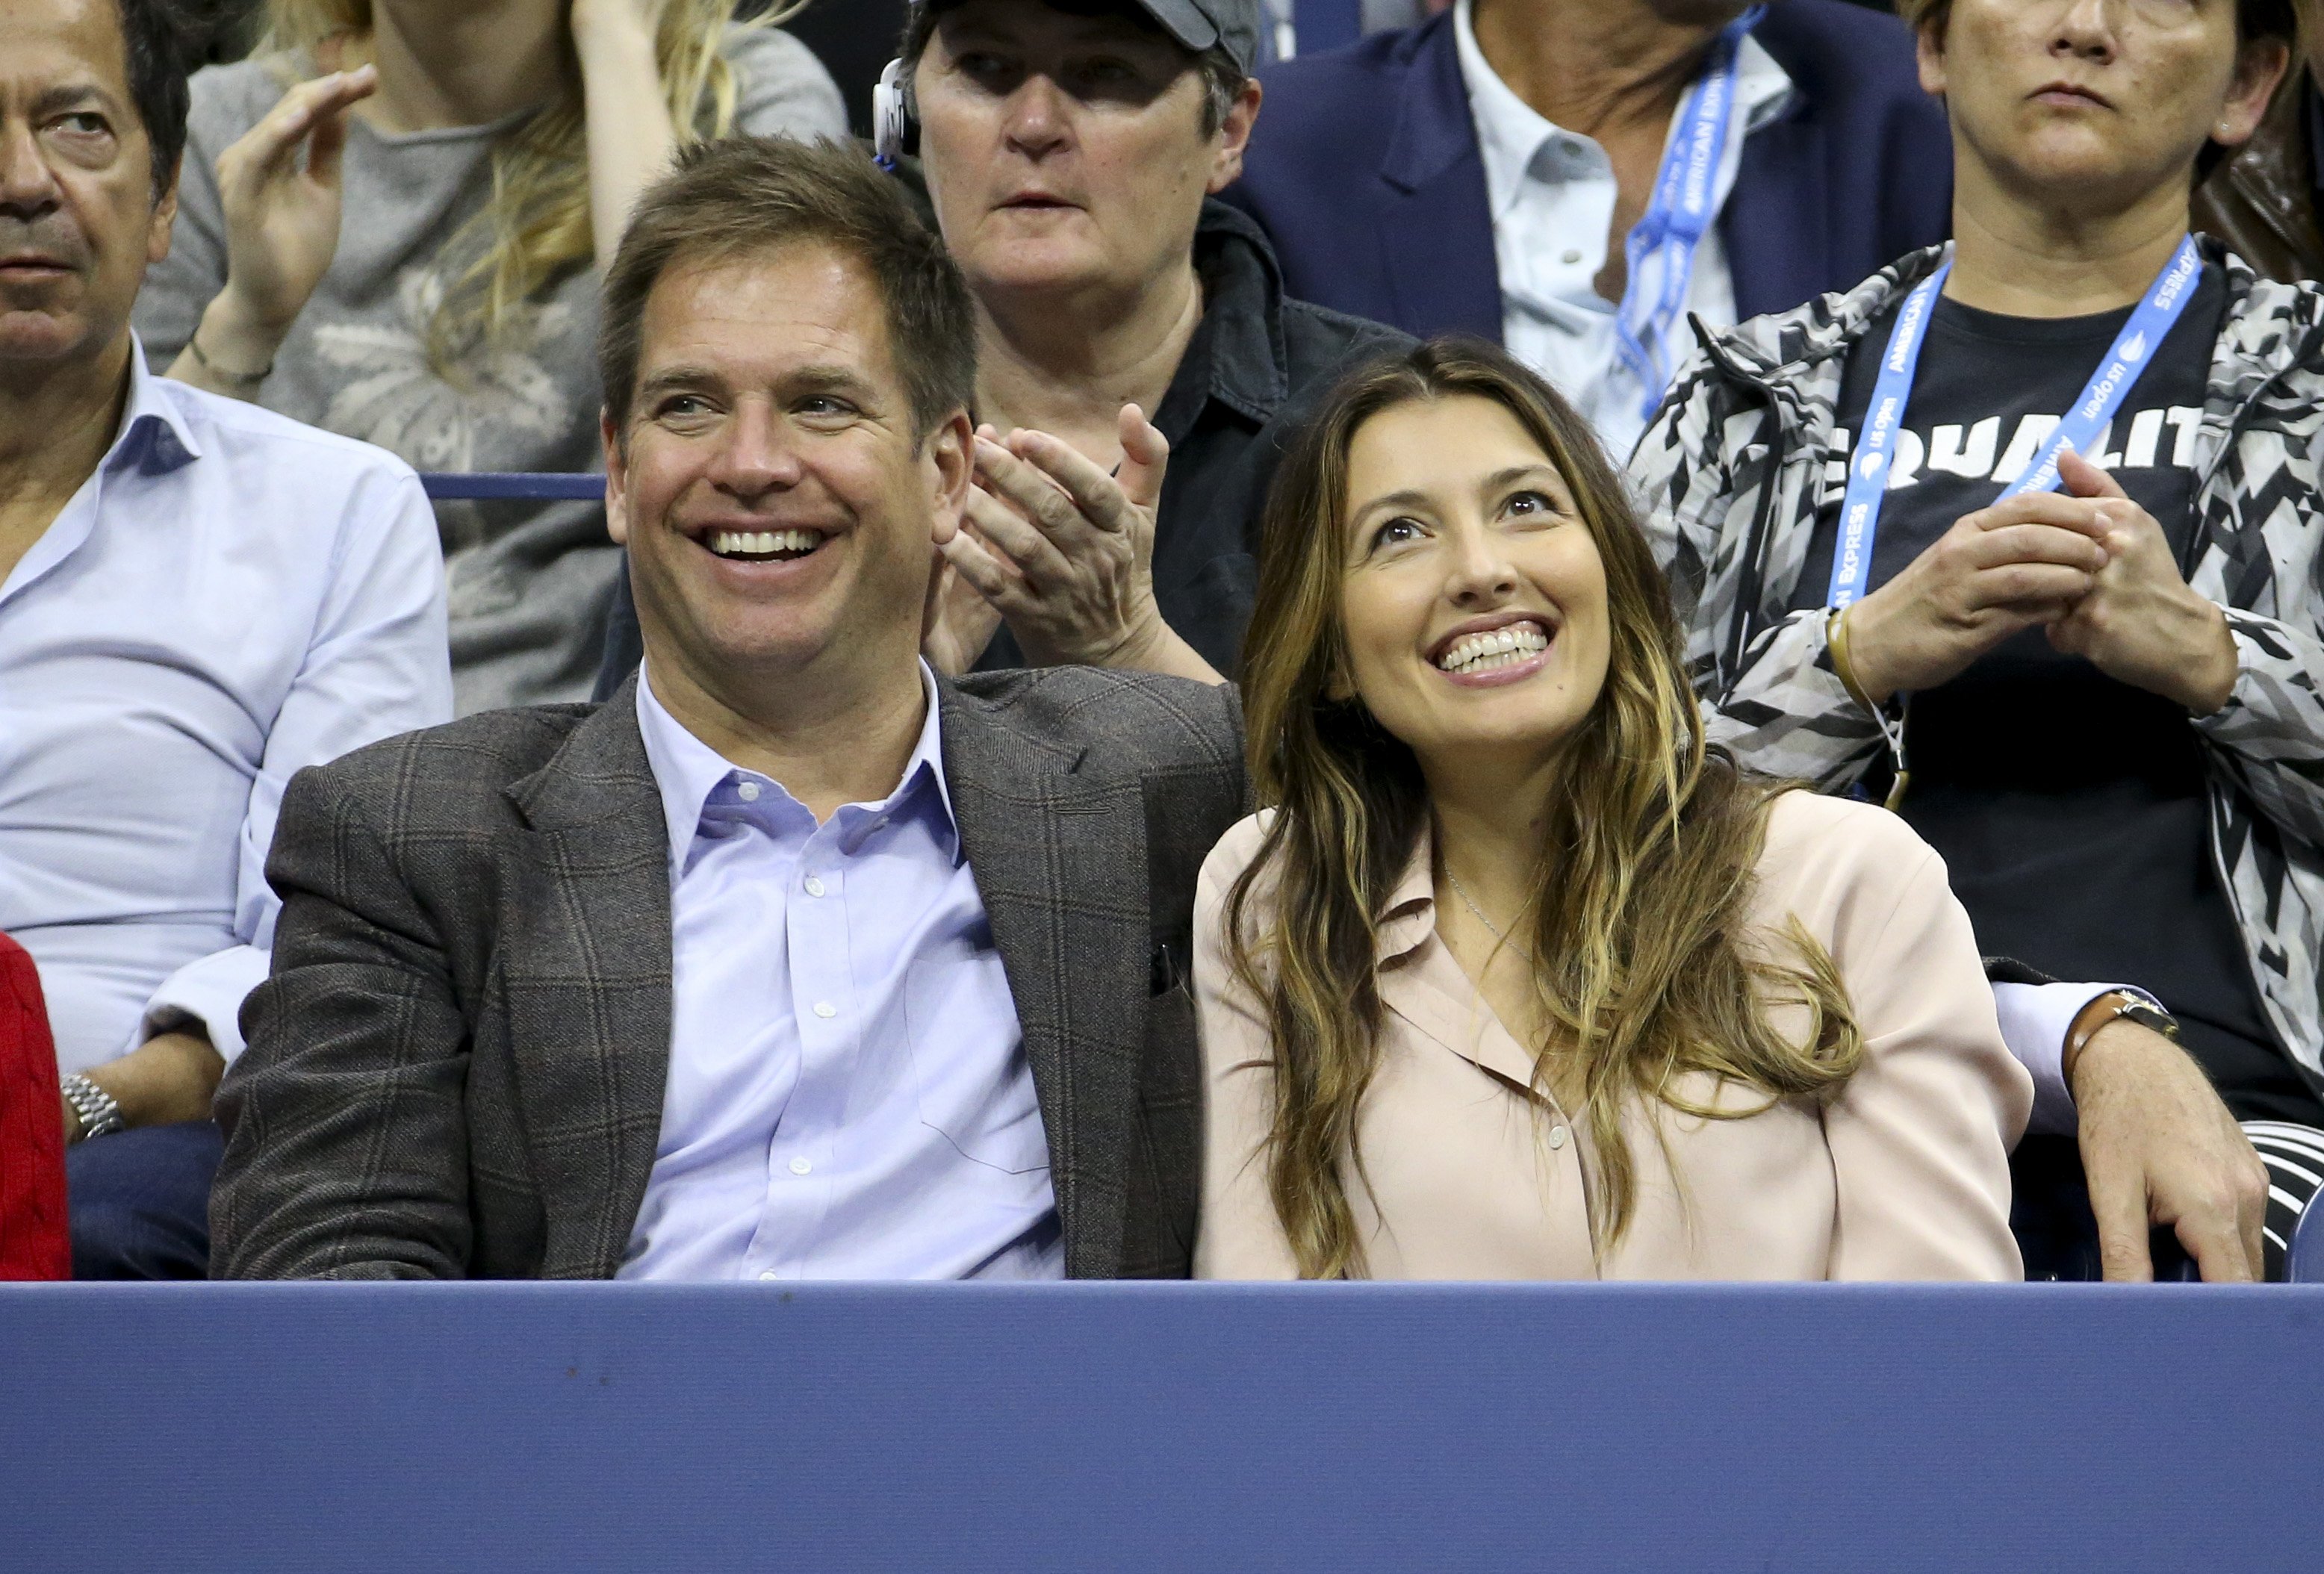 Michael Weatherly and Bojana Jankovic attend the men's final on day 14 of the 2018 tennis US Open, September 9, 2018 in Flushing Meadows, Queens, New York City. | Source: Getty Images